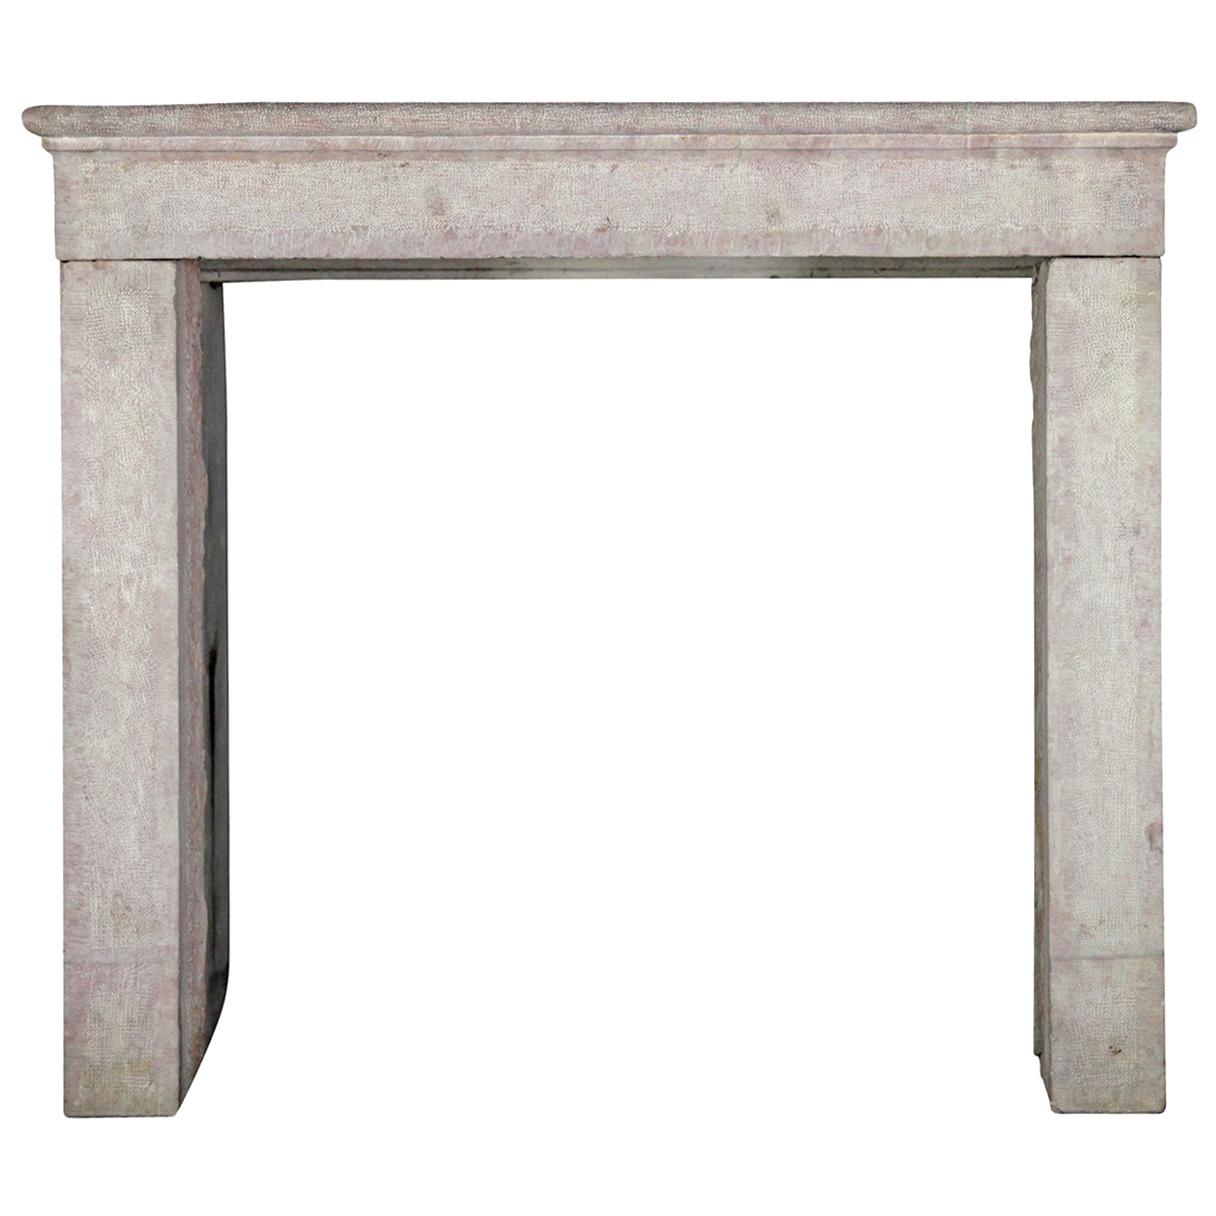 17th Century Small Rustic French Antique Fireplace Surround in Stone